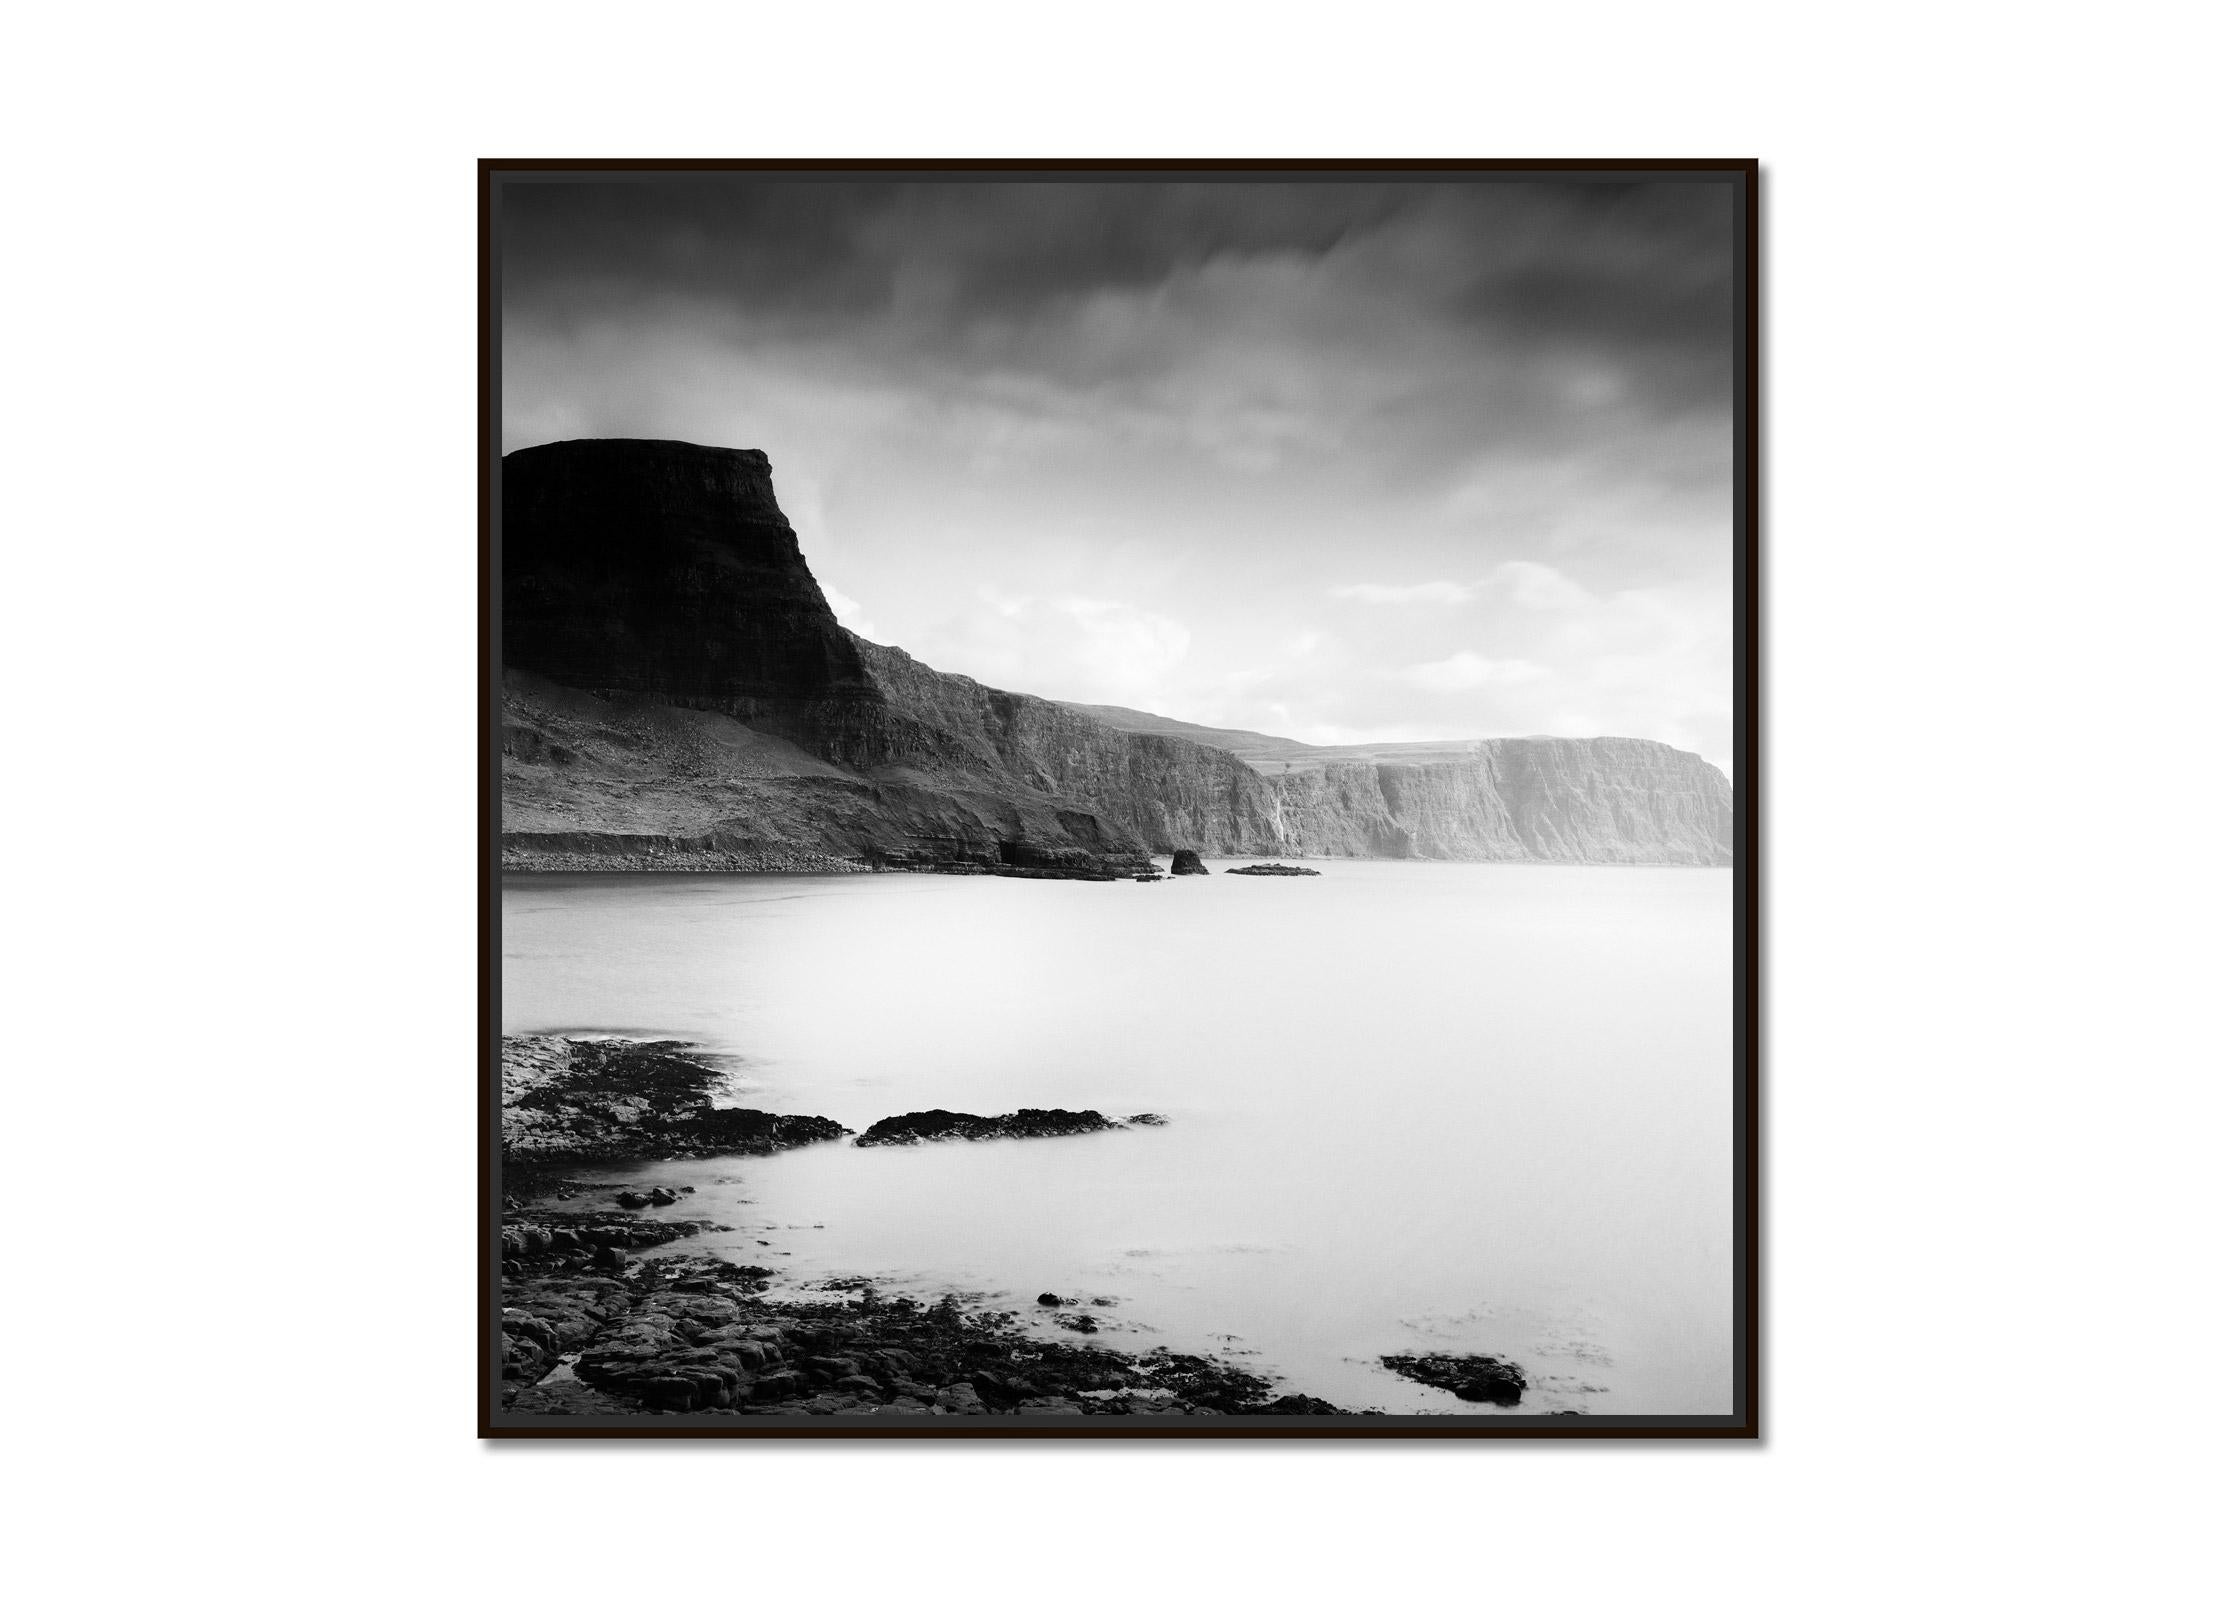 Neist Point, Isle of Sky, Scotland, black and white photography, print landscape - Photograph by Gerald Berghammer